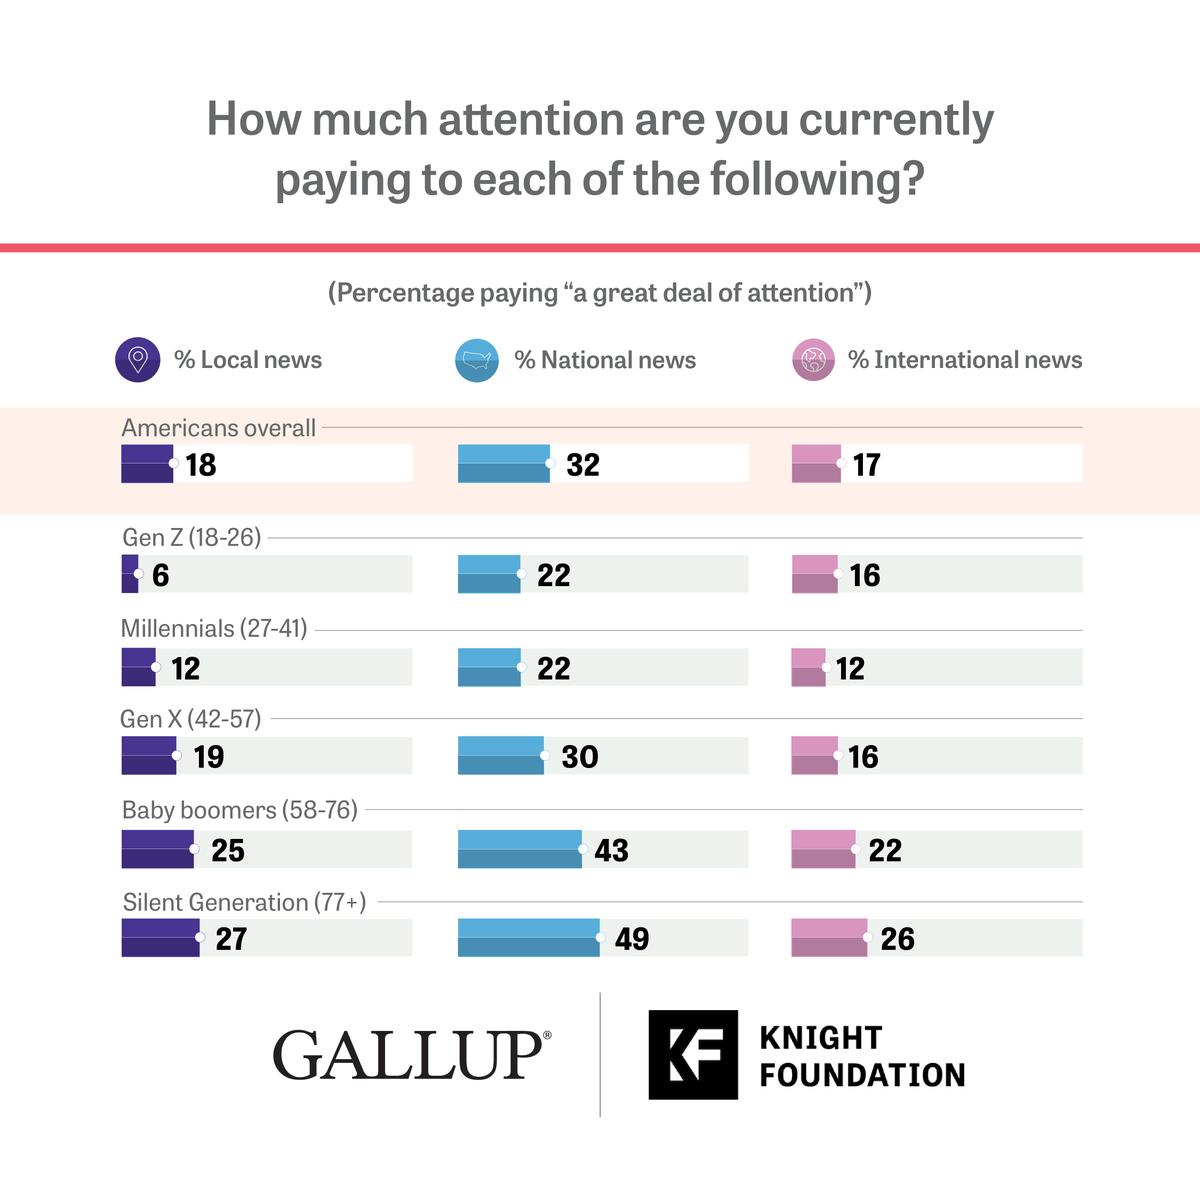 In the most recent American Views: 2022 survey from @knightfdn and Gallup, when asked how much attention they pay to local, national and international news, more Americans aged 58 and older say “a great deal of attention” compared to the national average. on.gallup.com/3zj5Wf0